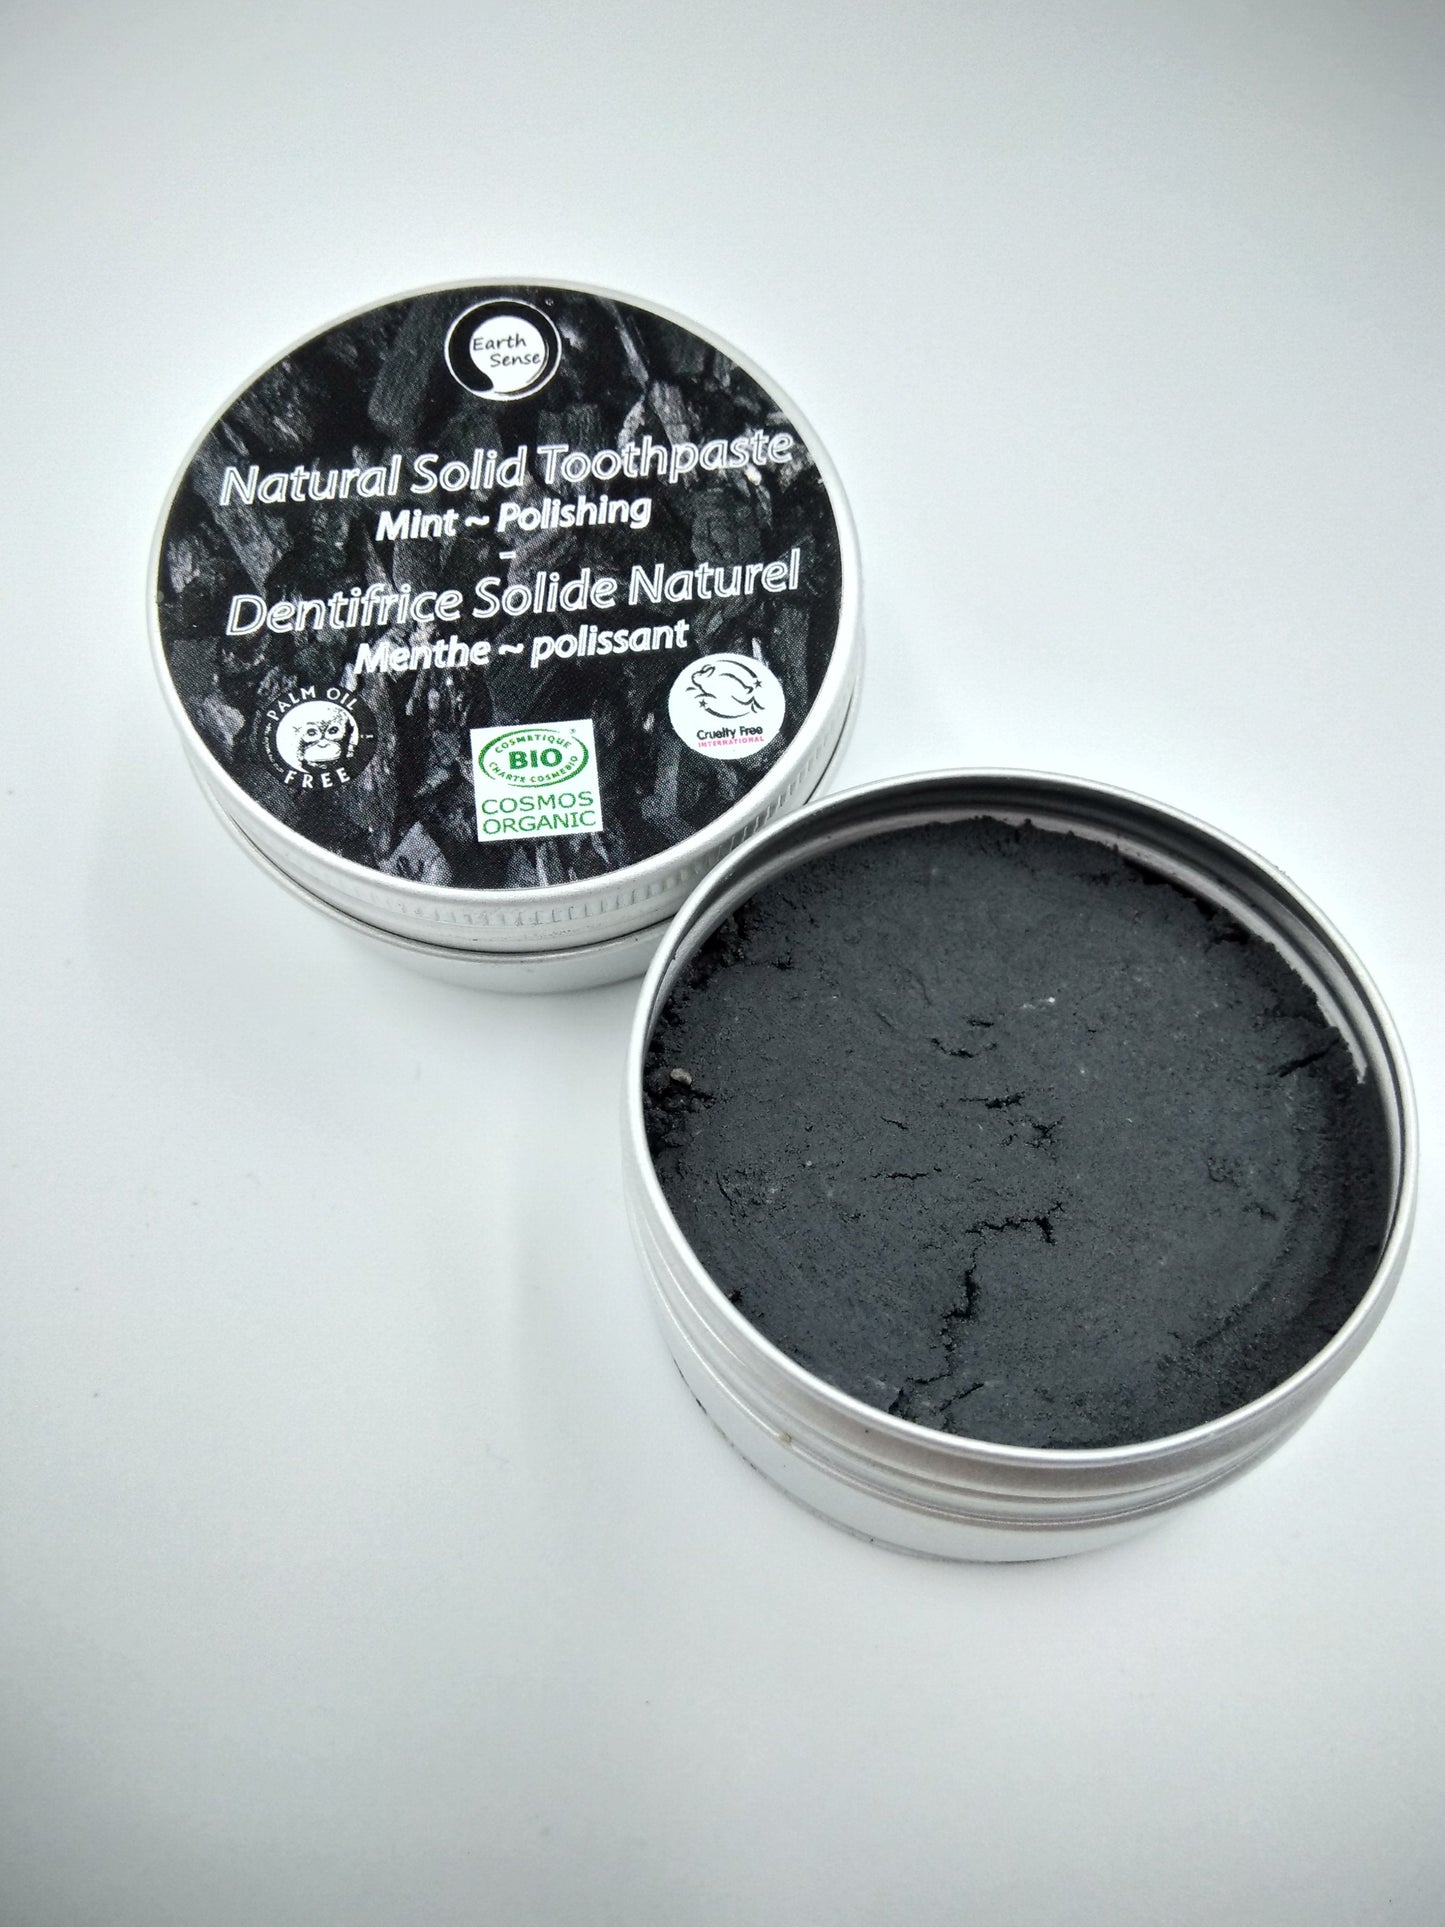 Natural Organic Certified Solid Toothpaste - Polishing-3